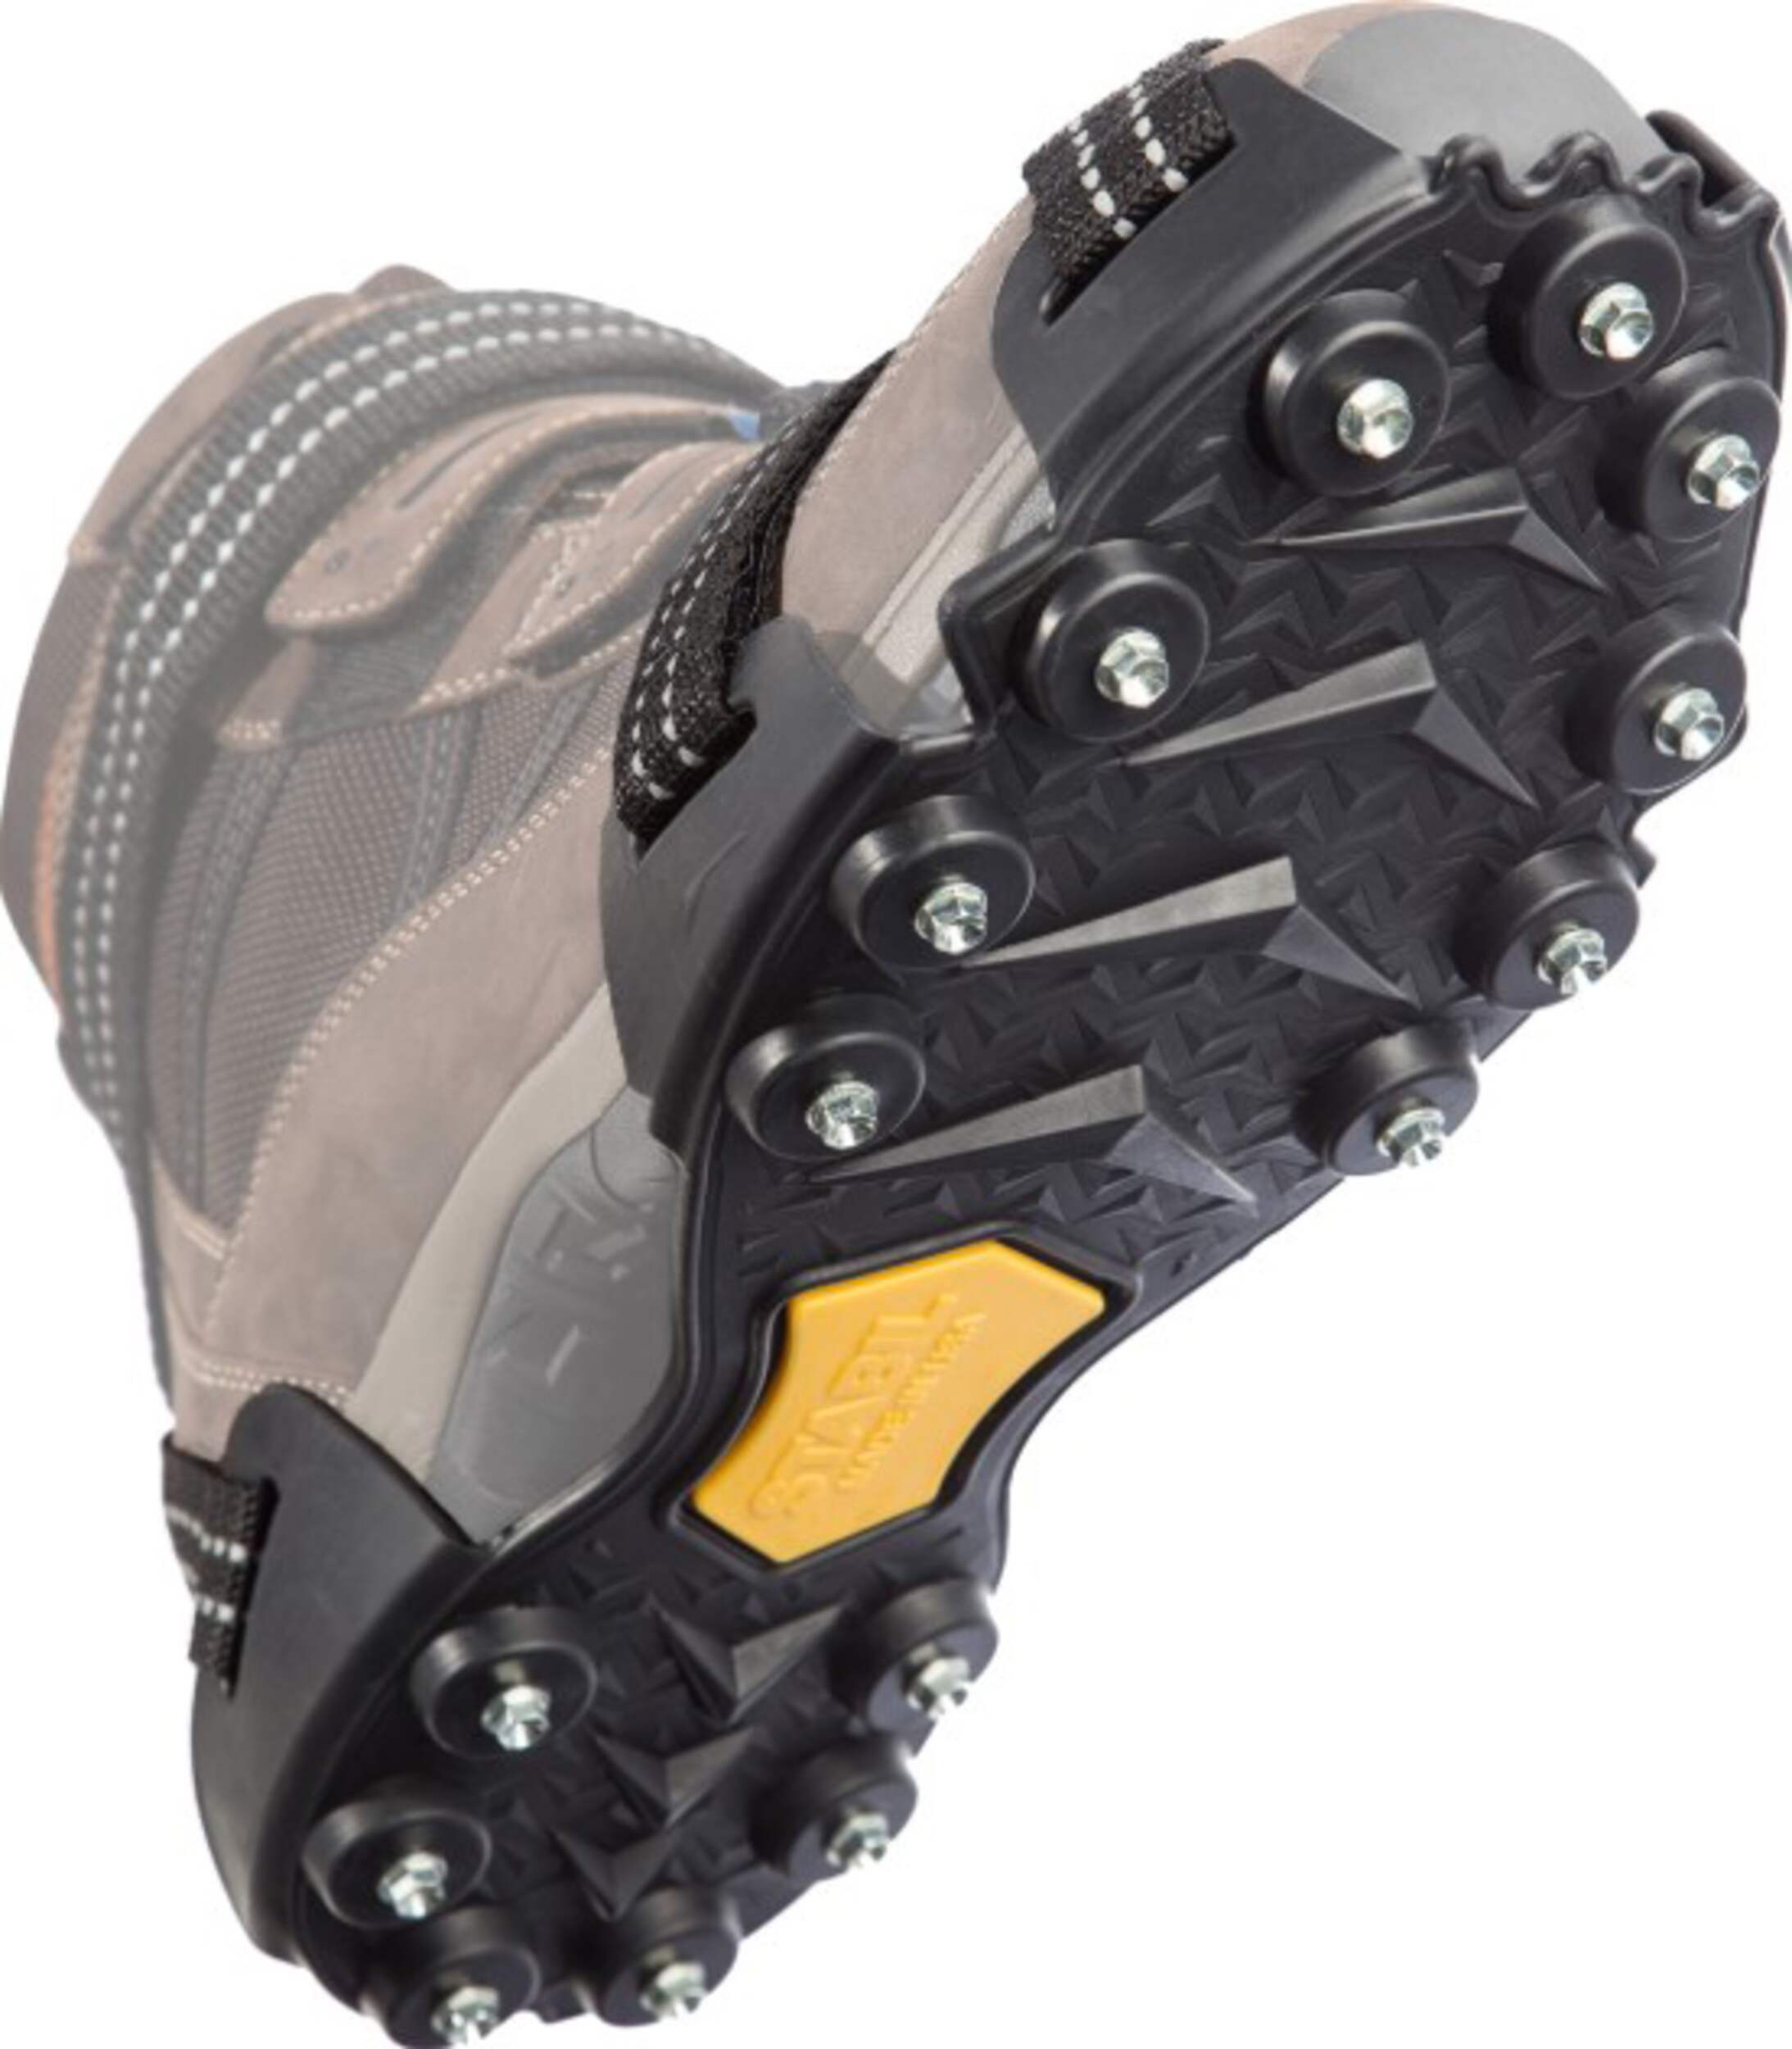 YakTrax Stabil Maxx2 Heavy Duty Adult Traction Shoe/Boot Grips for Ice ...